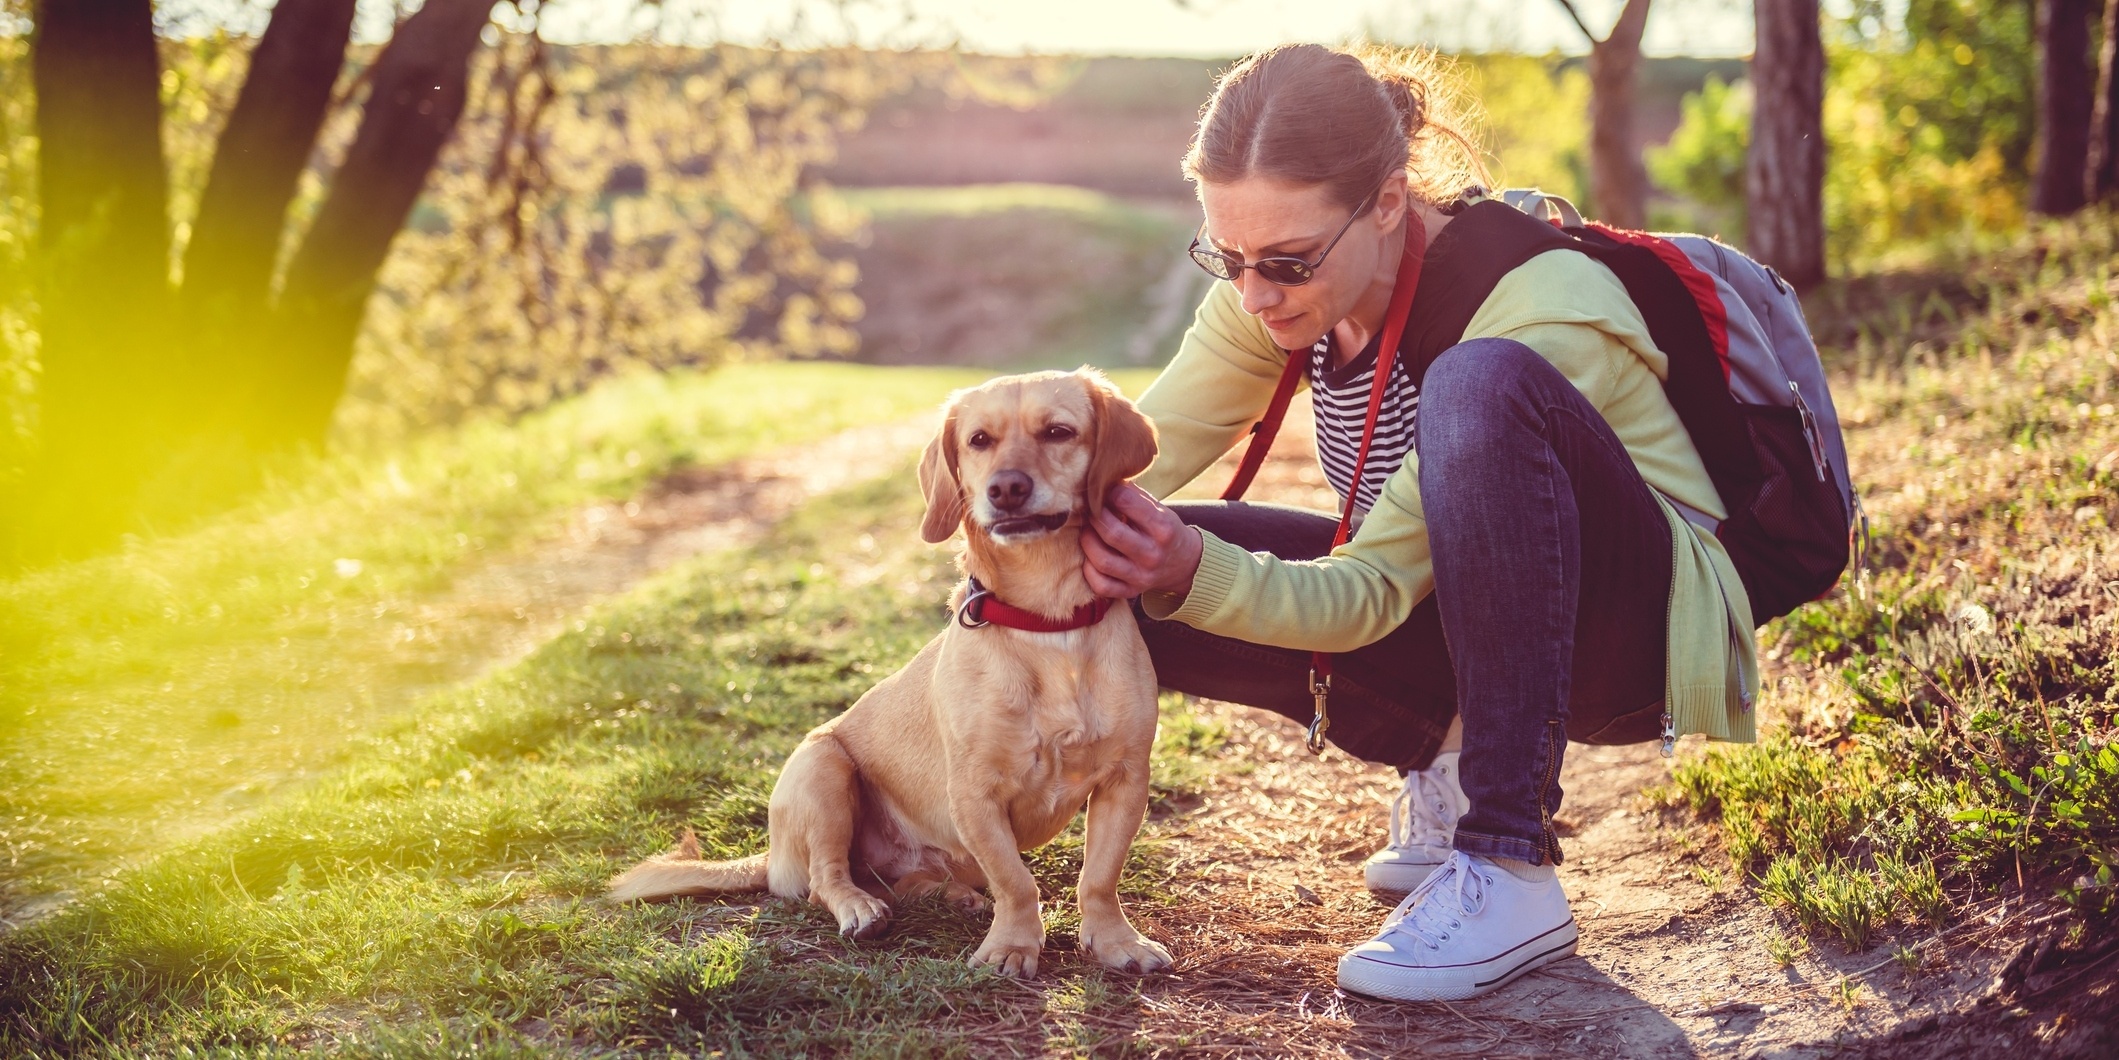 Lyme disease can have serious effects on people and pets and the symptoms can differ from person to person.